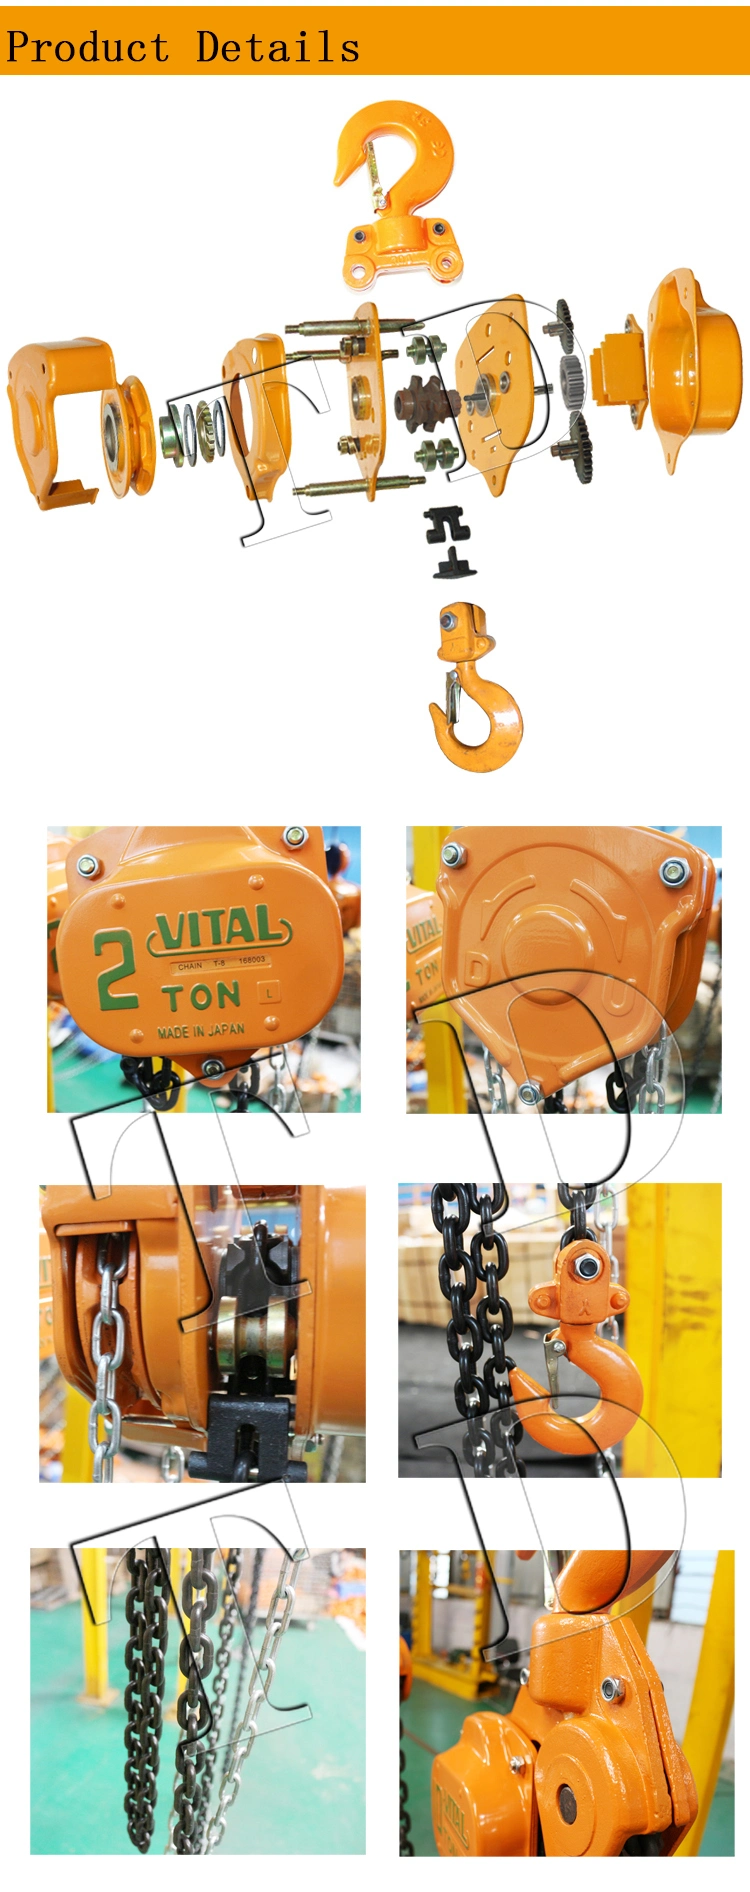 Best Selling 2ton 3ton Vital Chain Block Chain Hoist with G80 Chain Now Hot